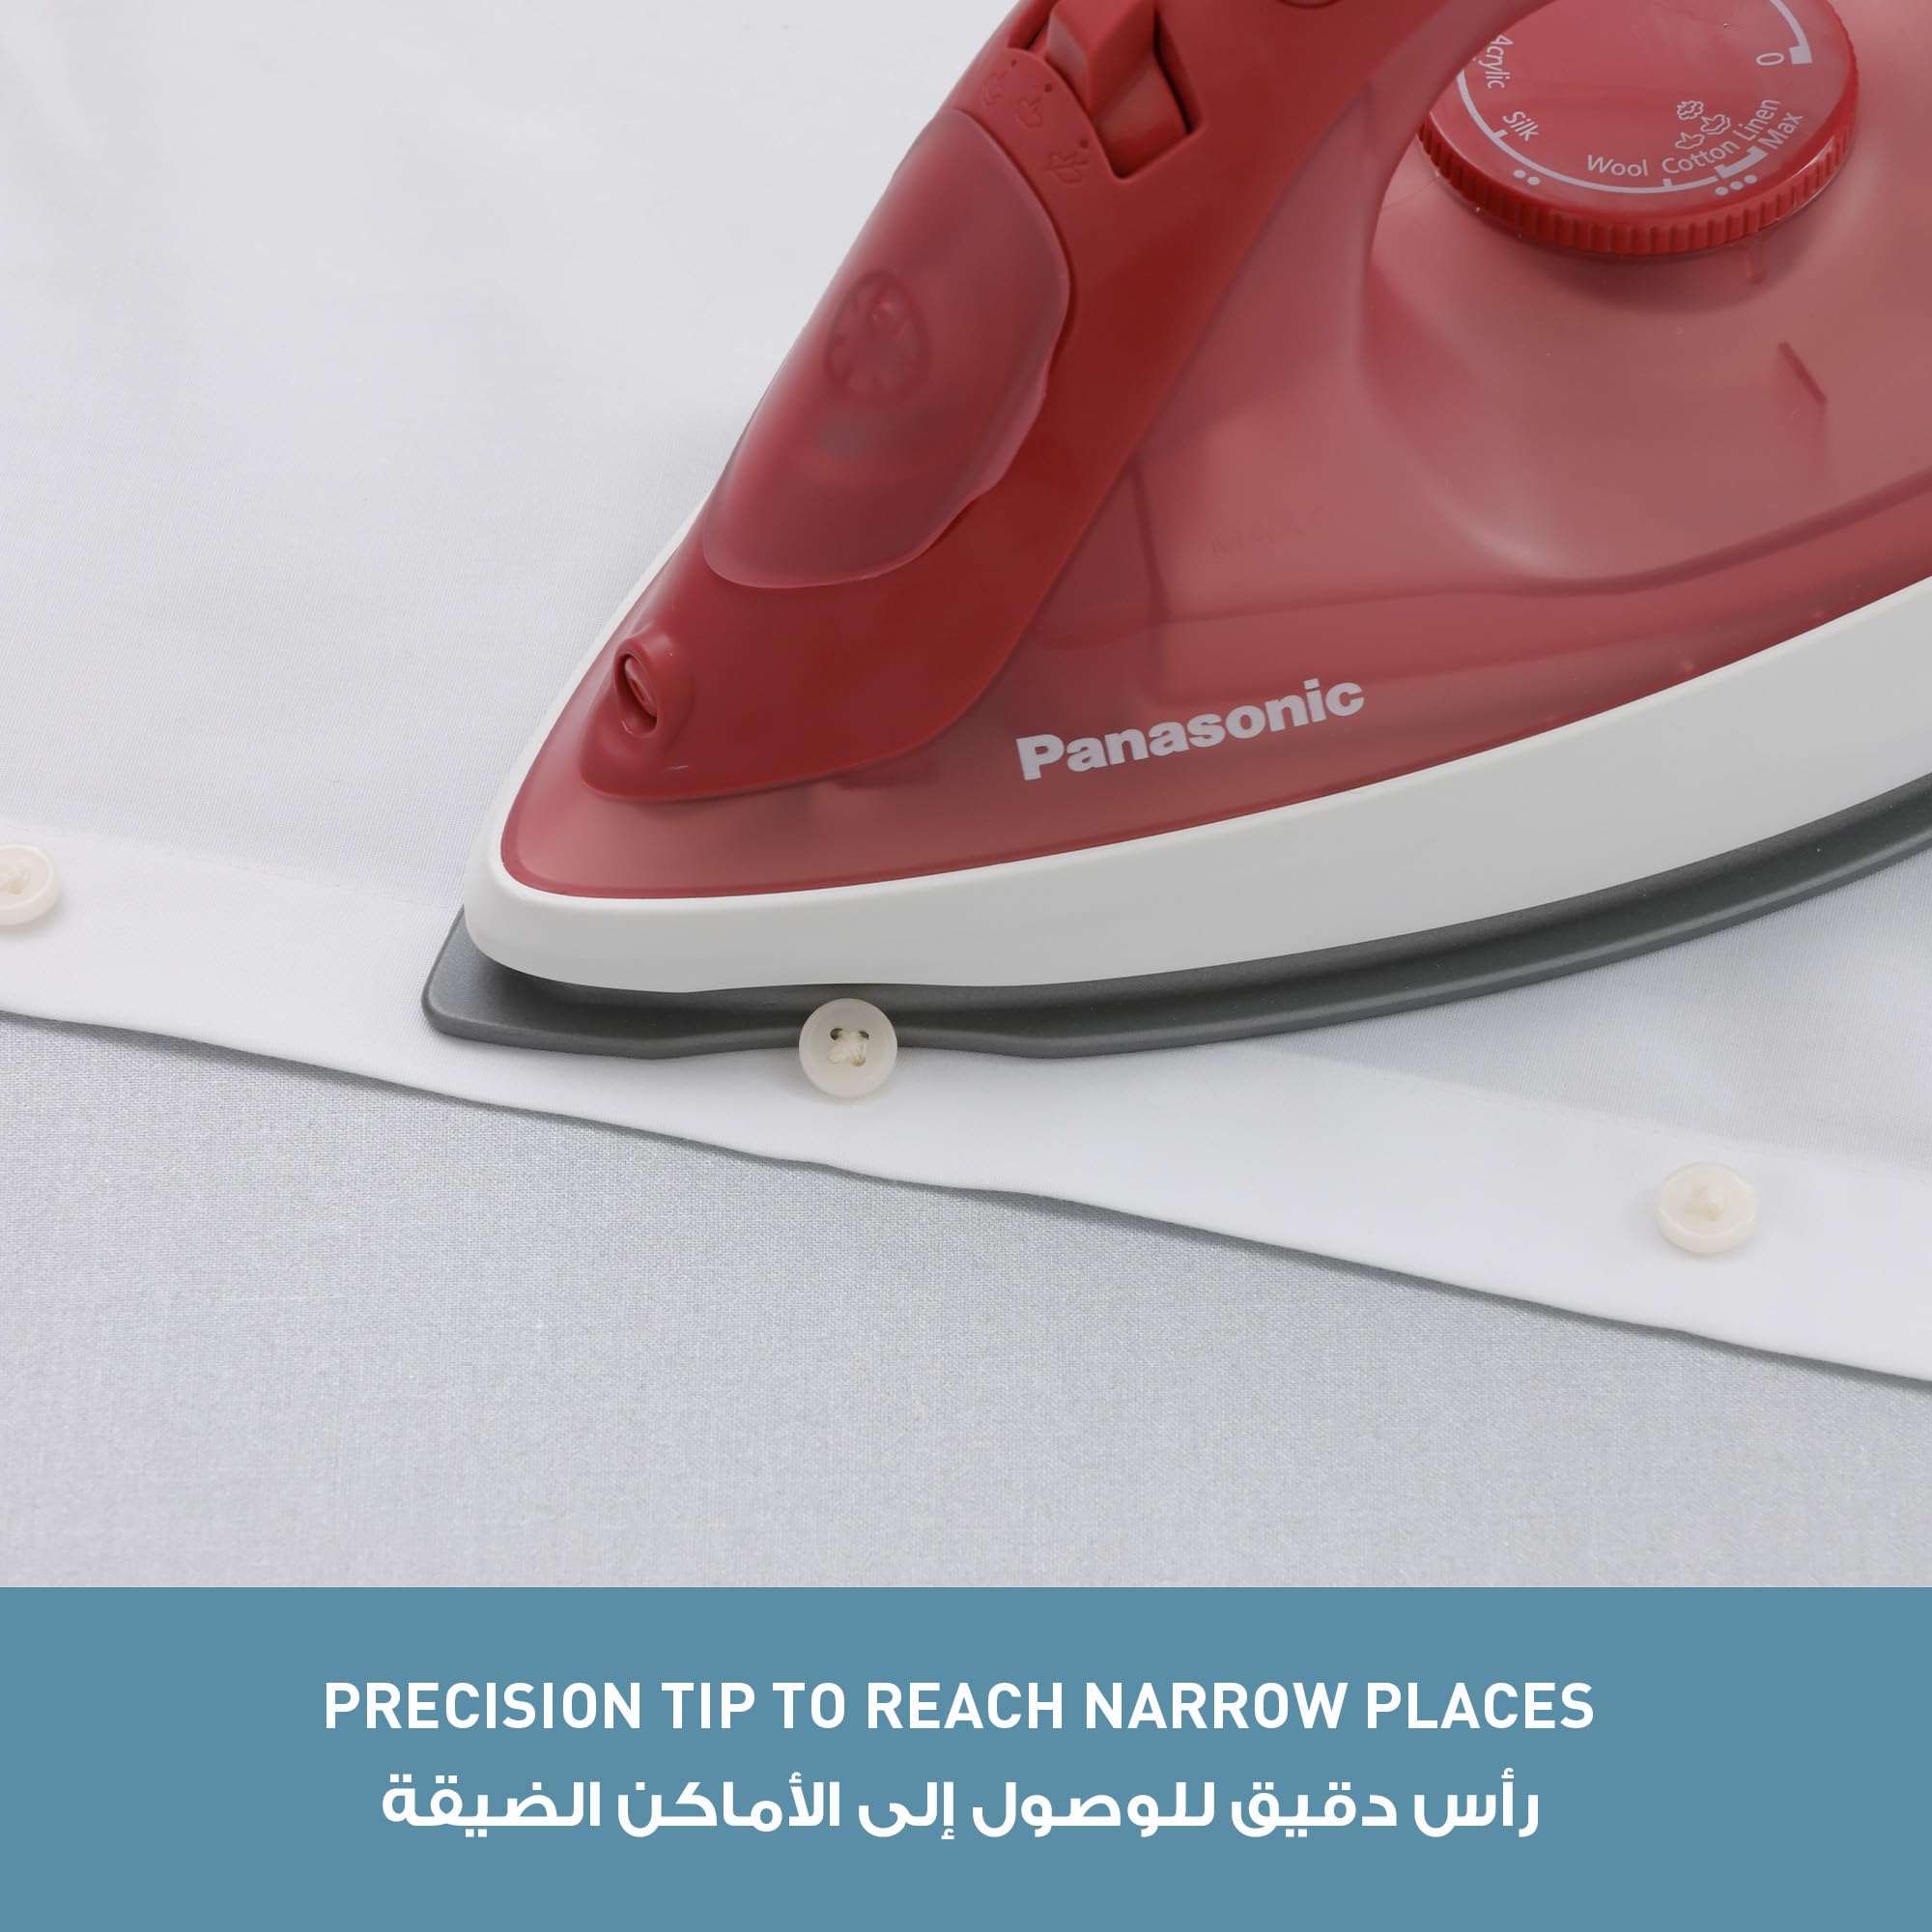 Panasonic Steam Iron NI-S430RTH 2300W with Large Water Tank Capacity, 300ml, Silver Titanium Soleplate - Red